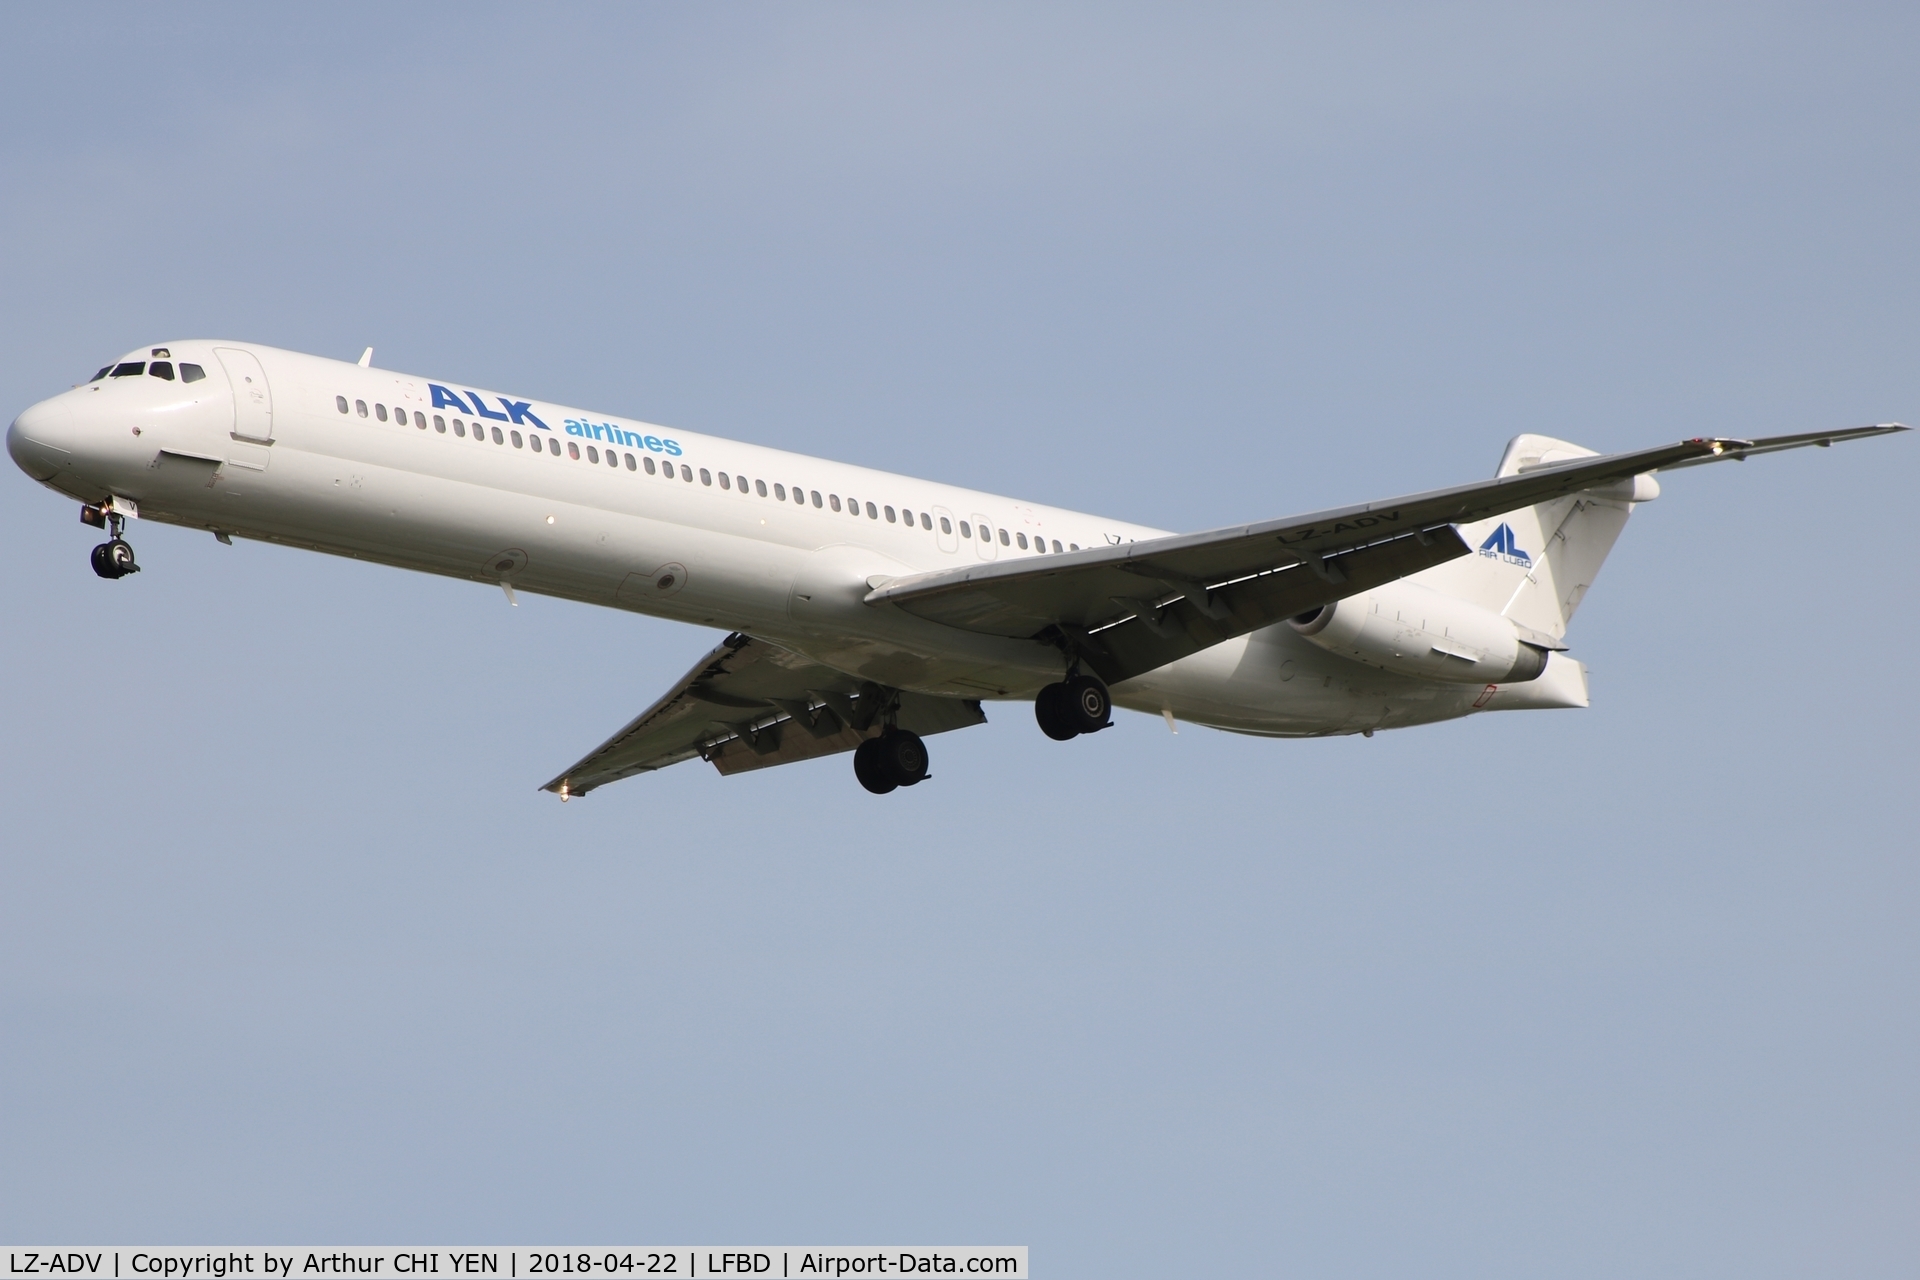 LZ-ADV, 1989 McDonnell Douglas MD-82 (DC-9-82) C/N 53053, From Shannon